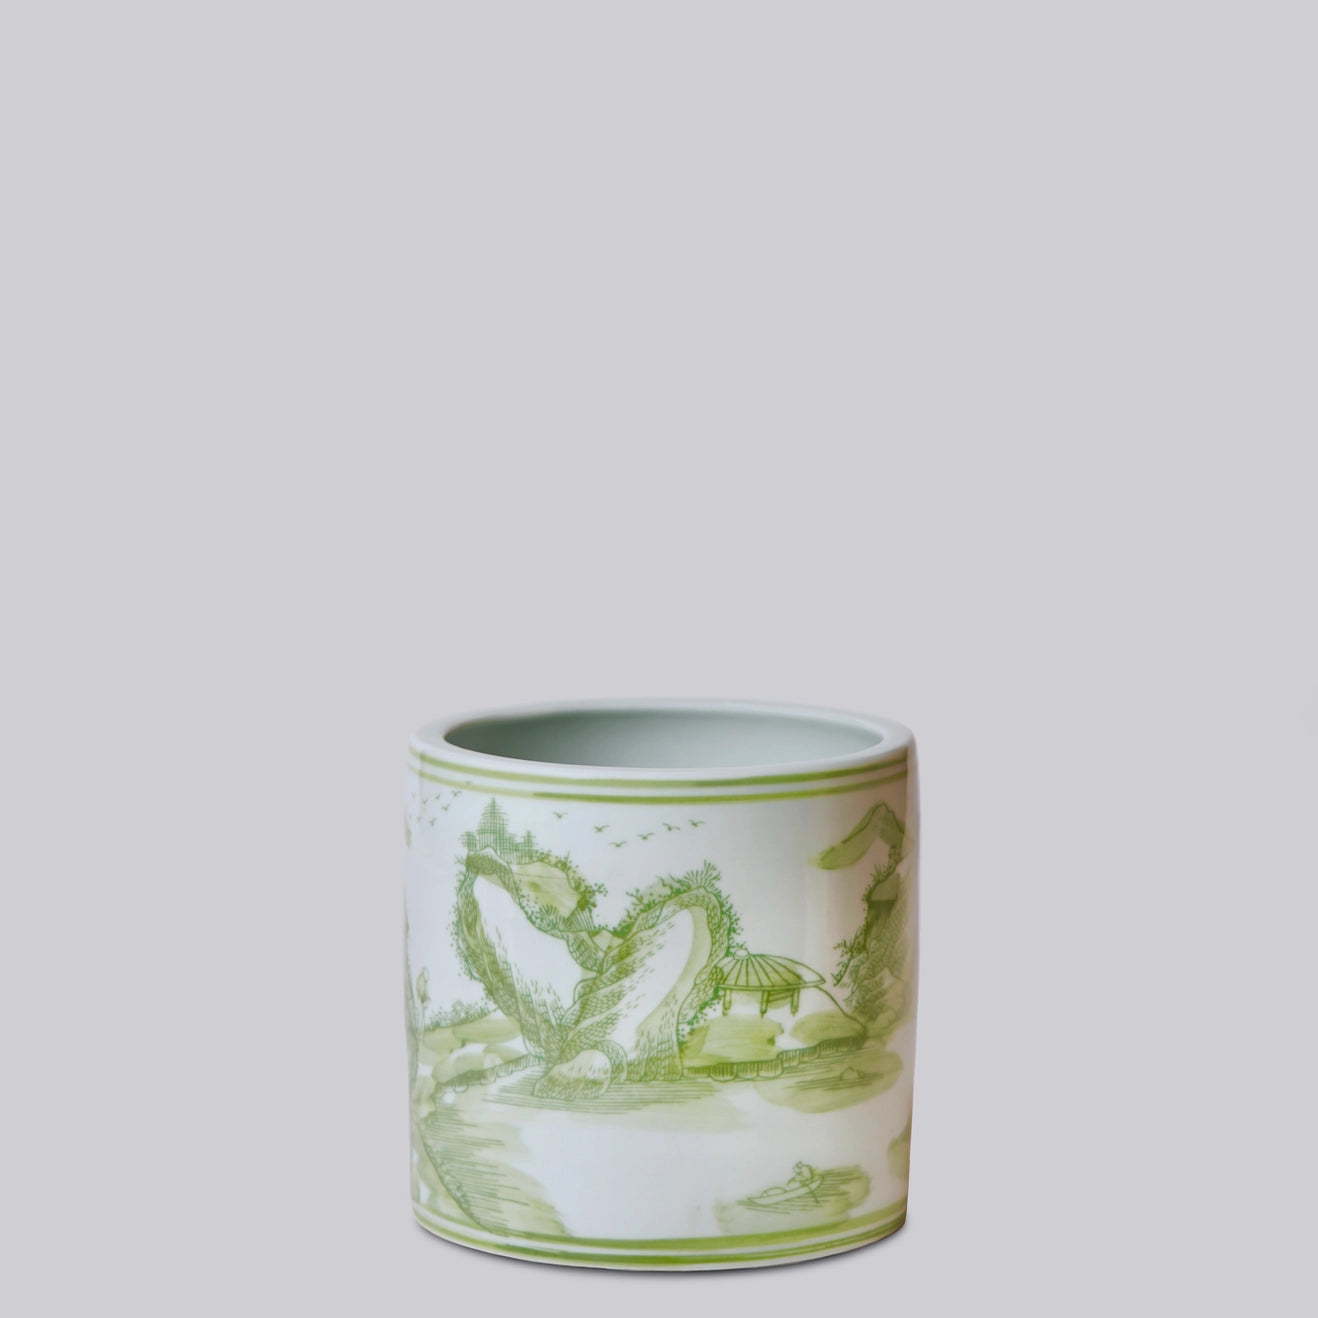 Small Green and White Porcelain River Landscape Cachepot